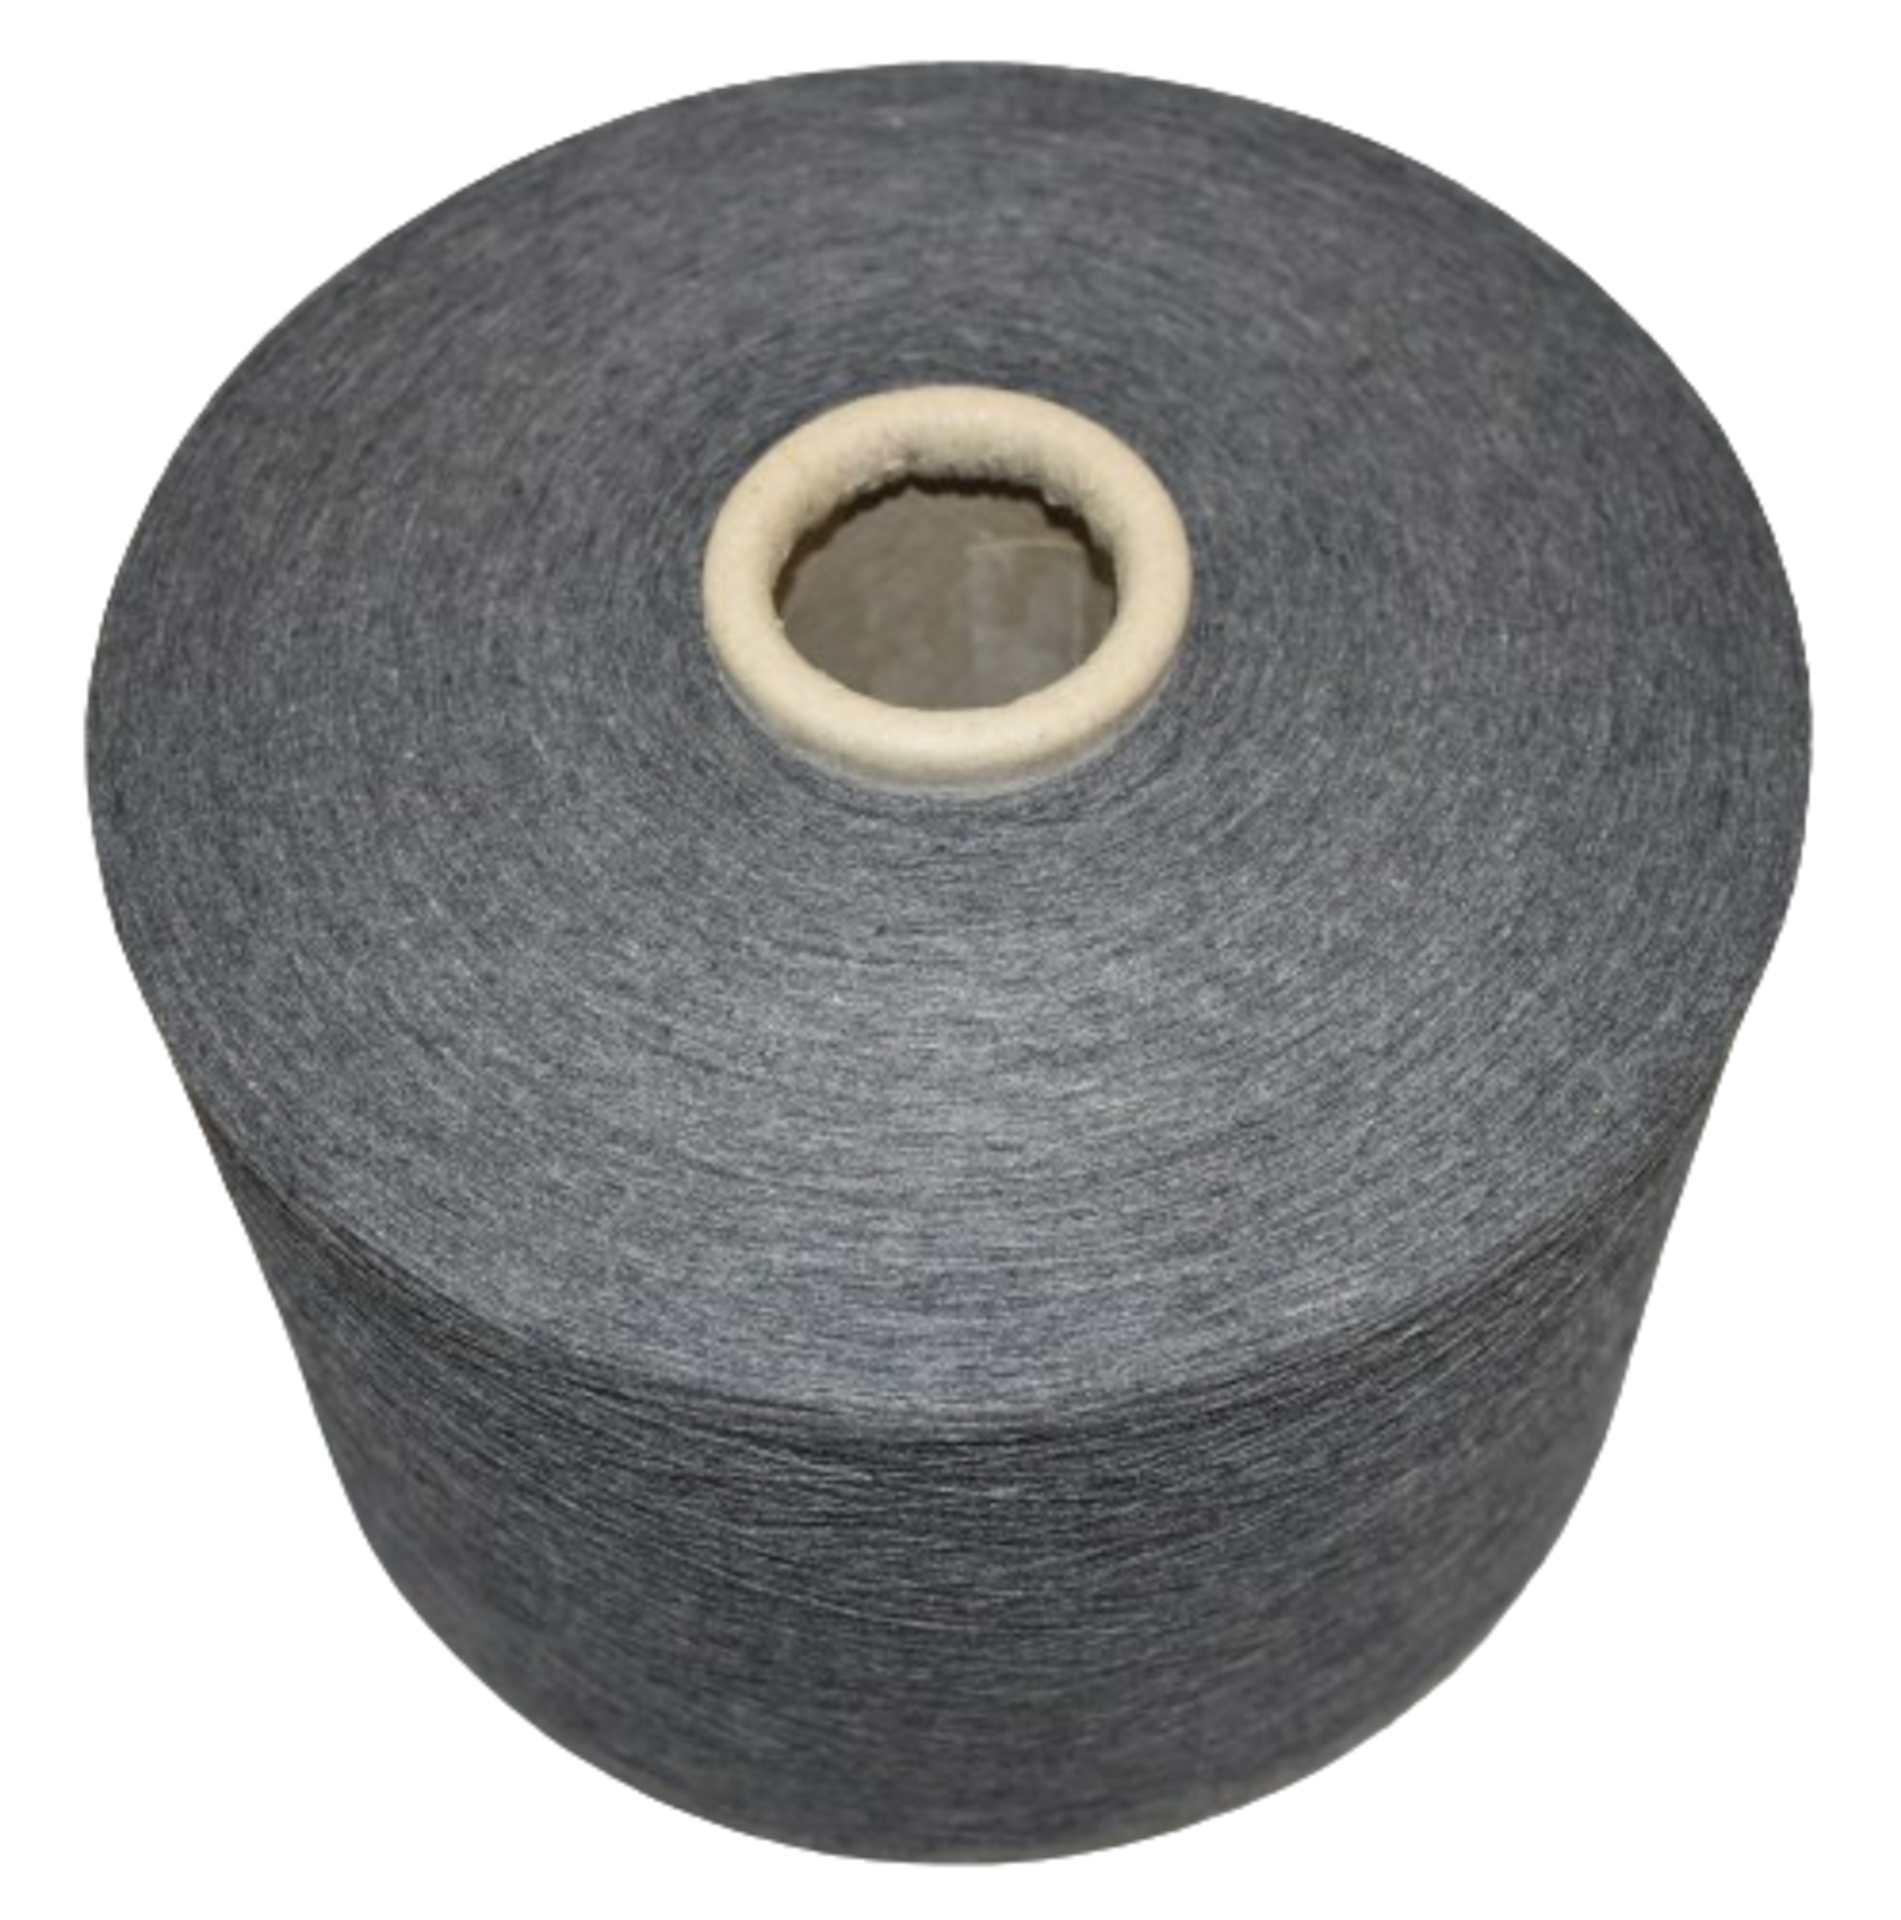 4 x Cones of 1/13 MicroCotton Knitting Yarn - Mid Grey - Approx Weight: 2,500g - New Stock ABL Yarn - Image 2 of 11